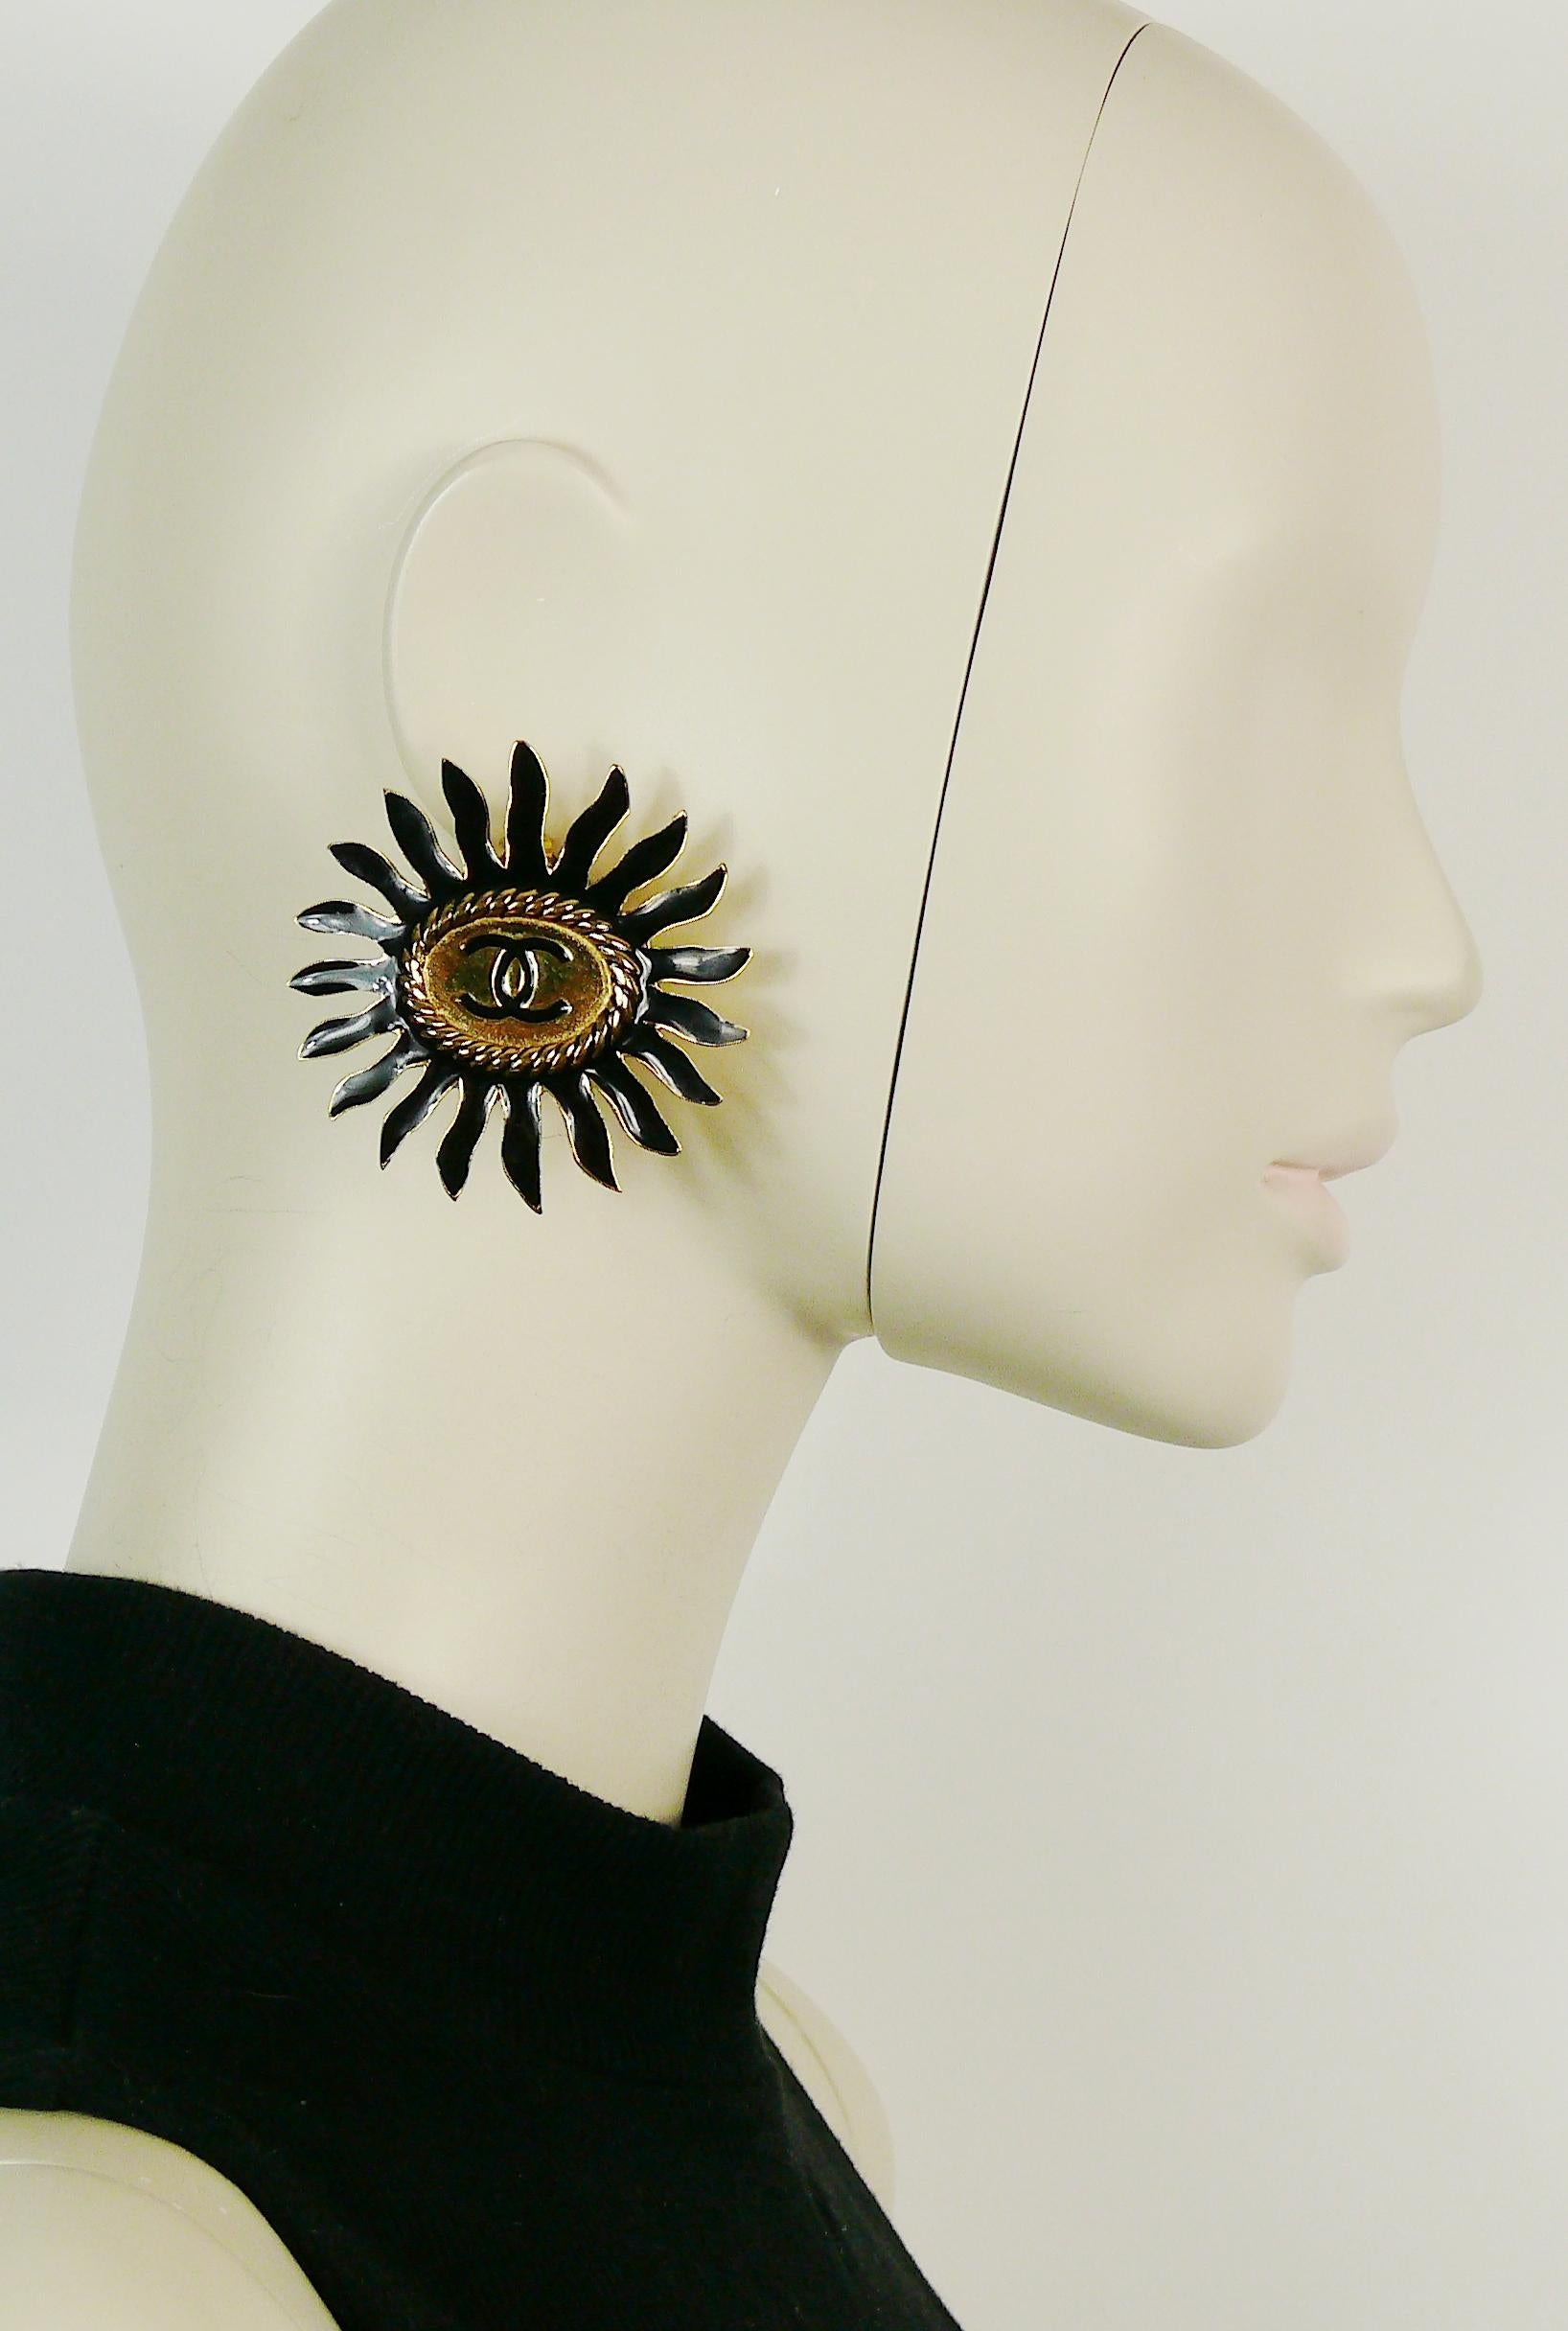 CHANEL vintage rare massive gold toned and black enamel sunburst clip-on earrings featuring CC monogram.

Embossed CHANEL.

Indicative measurements : width approx. 5.8 cm (2.28 inches) / height approx. 5.8 cm (2.28 inches).
 
Comes with original box